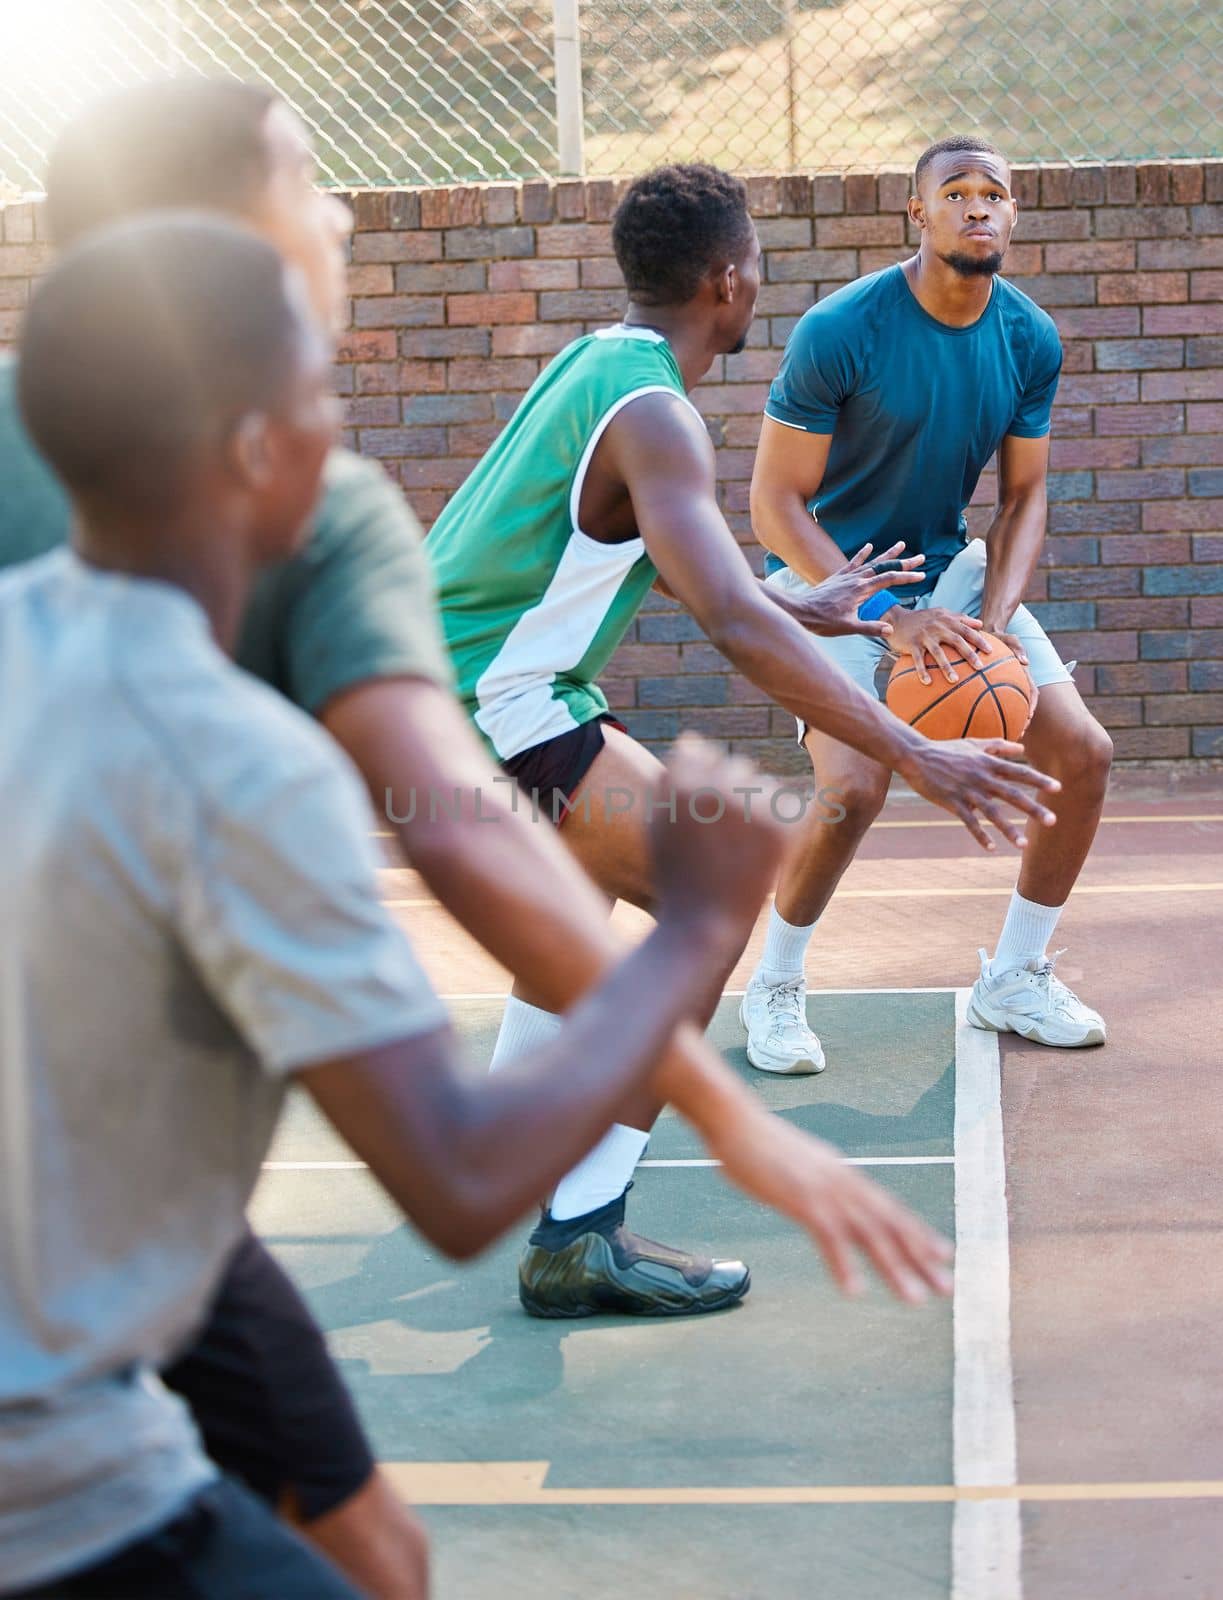 Basketball, game and team sports for match point, score or ready for a shot at the basketball court. Basketball players in sport fitness, exercise or workout at the court together in the outdoors by YuriArcurs